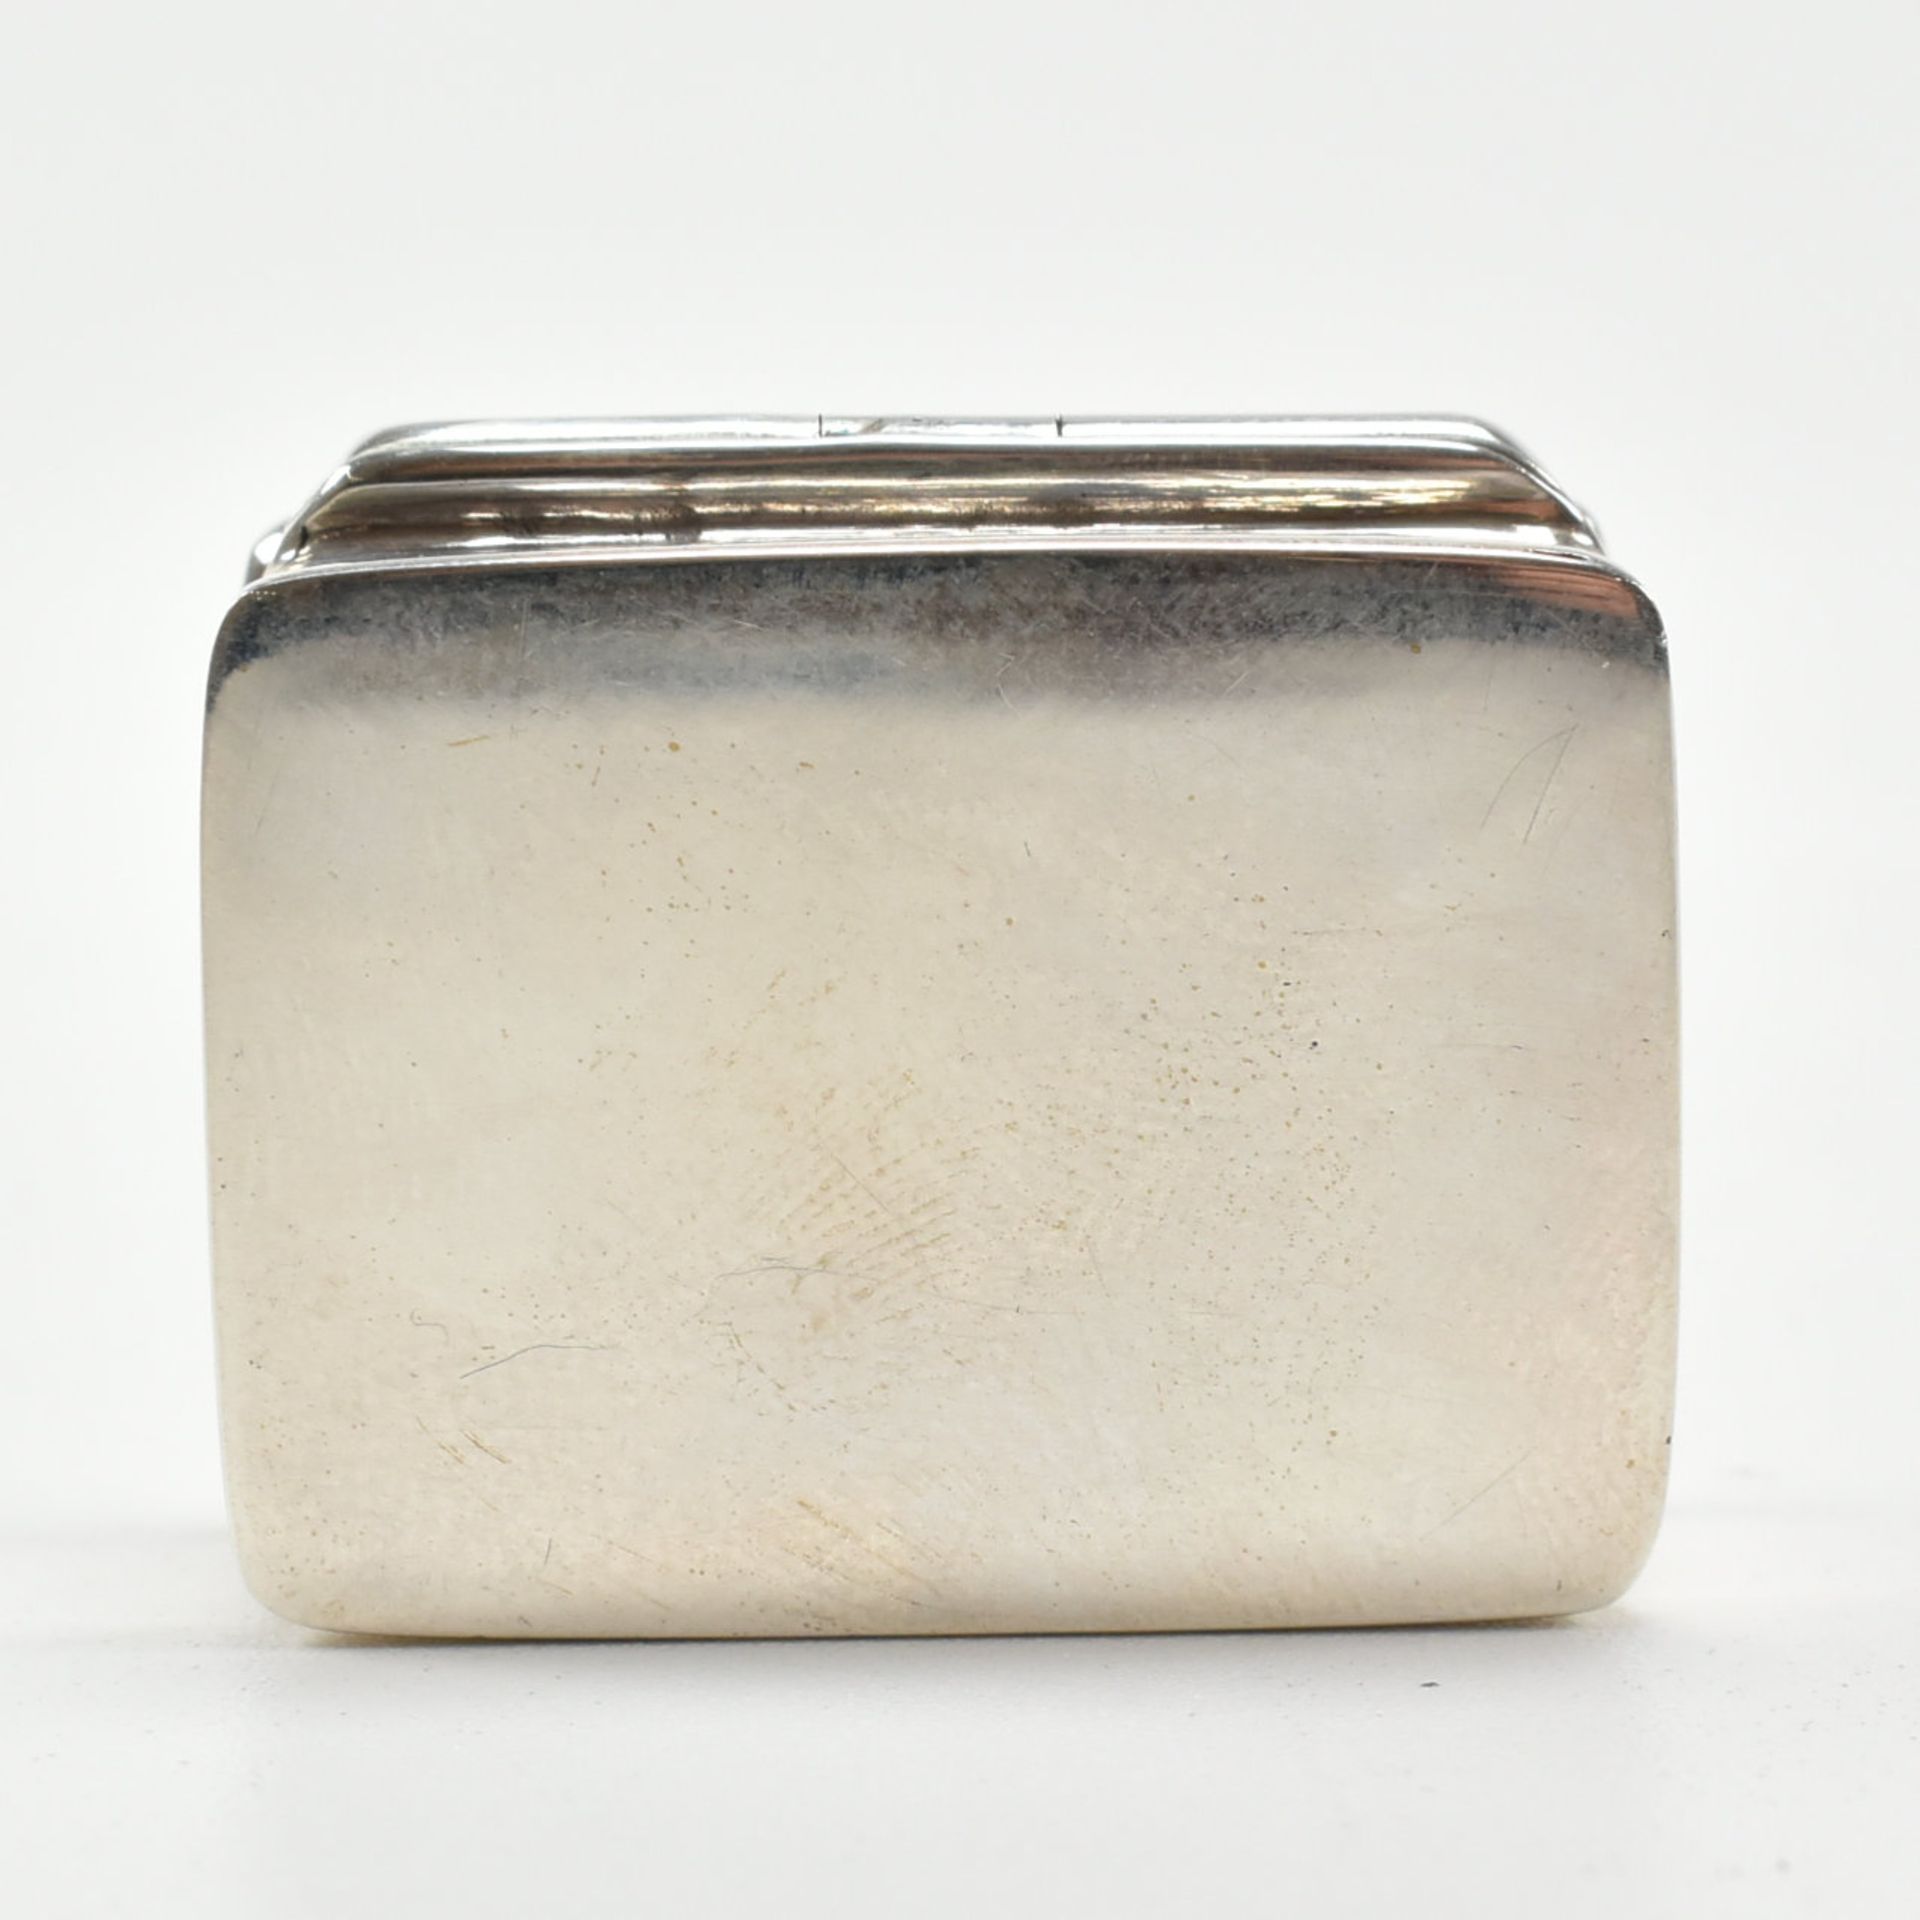 CONTEMPORARY STERLING SILVER PILL BOX WITH EROTIC ENAMEL PANEL - Image 4 of 7